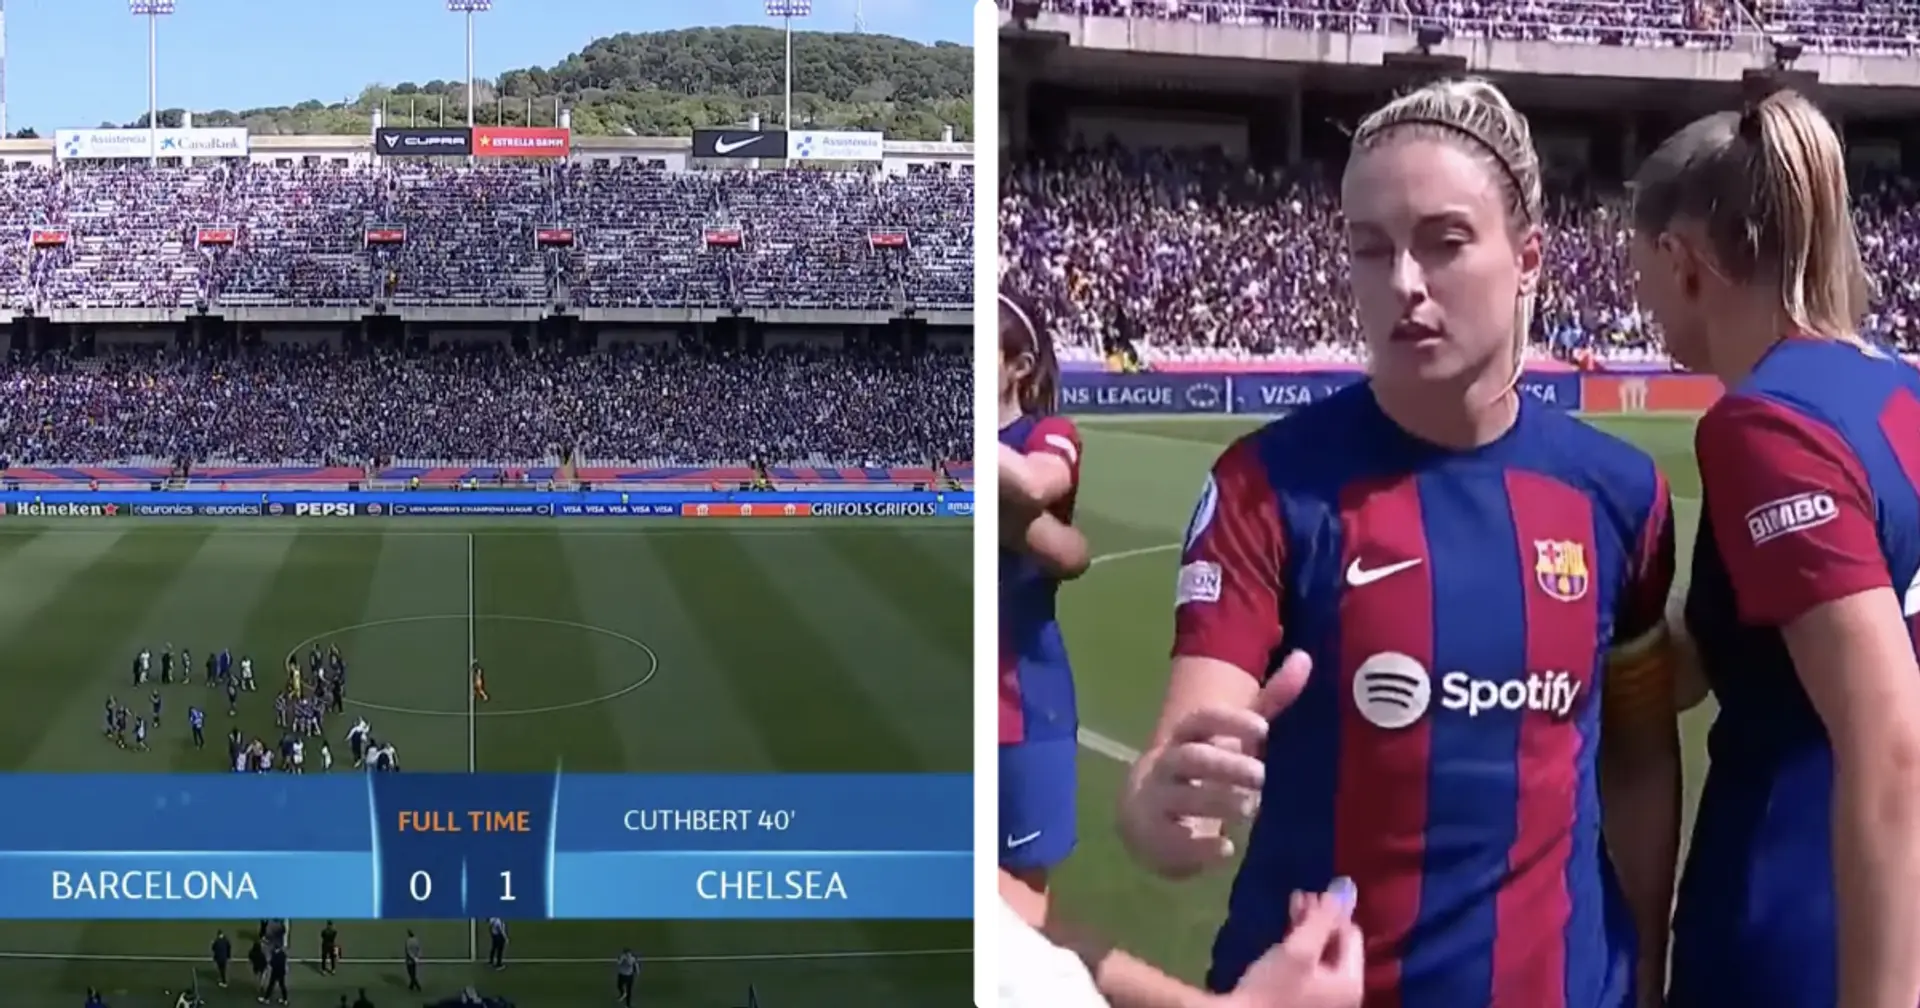 Barca Femeni LOSE to Chelsea in Champions League semis – first defeat in 335 days